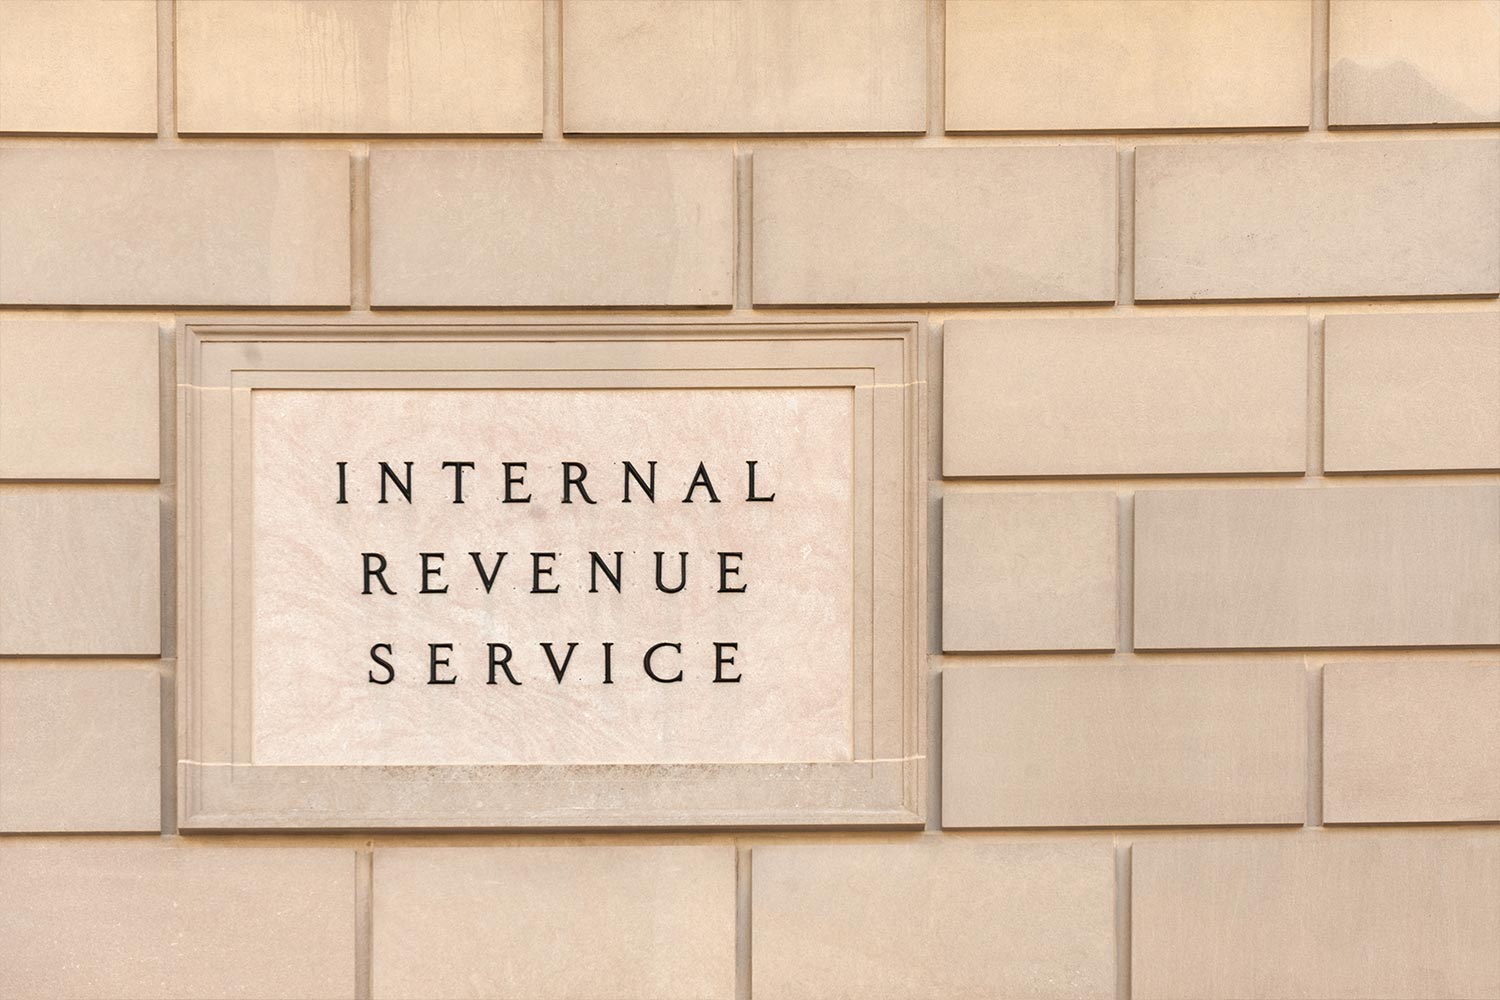 Nonprofits: How to Survive an IRS Audit